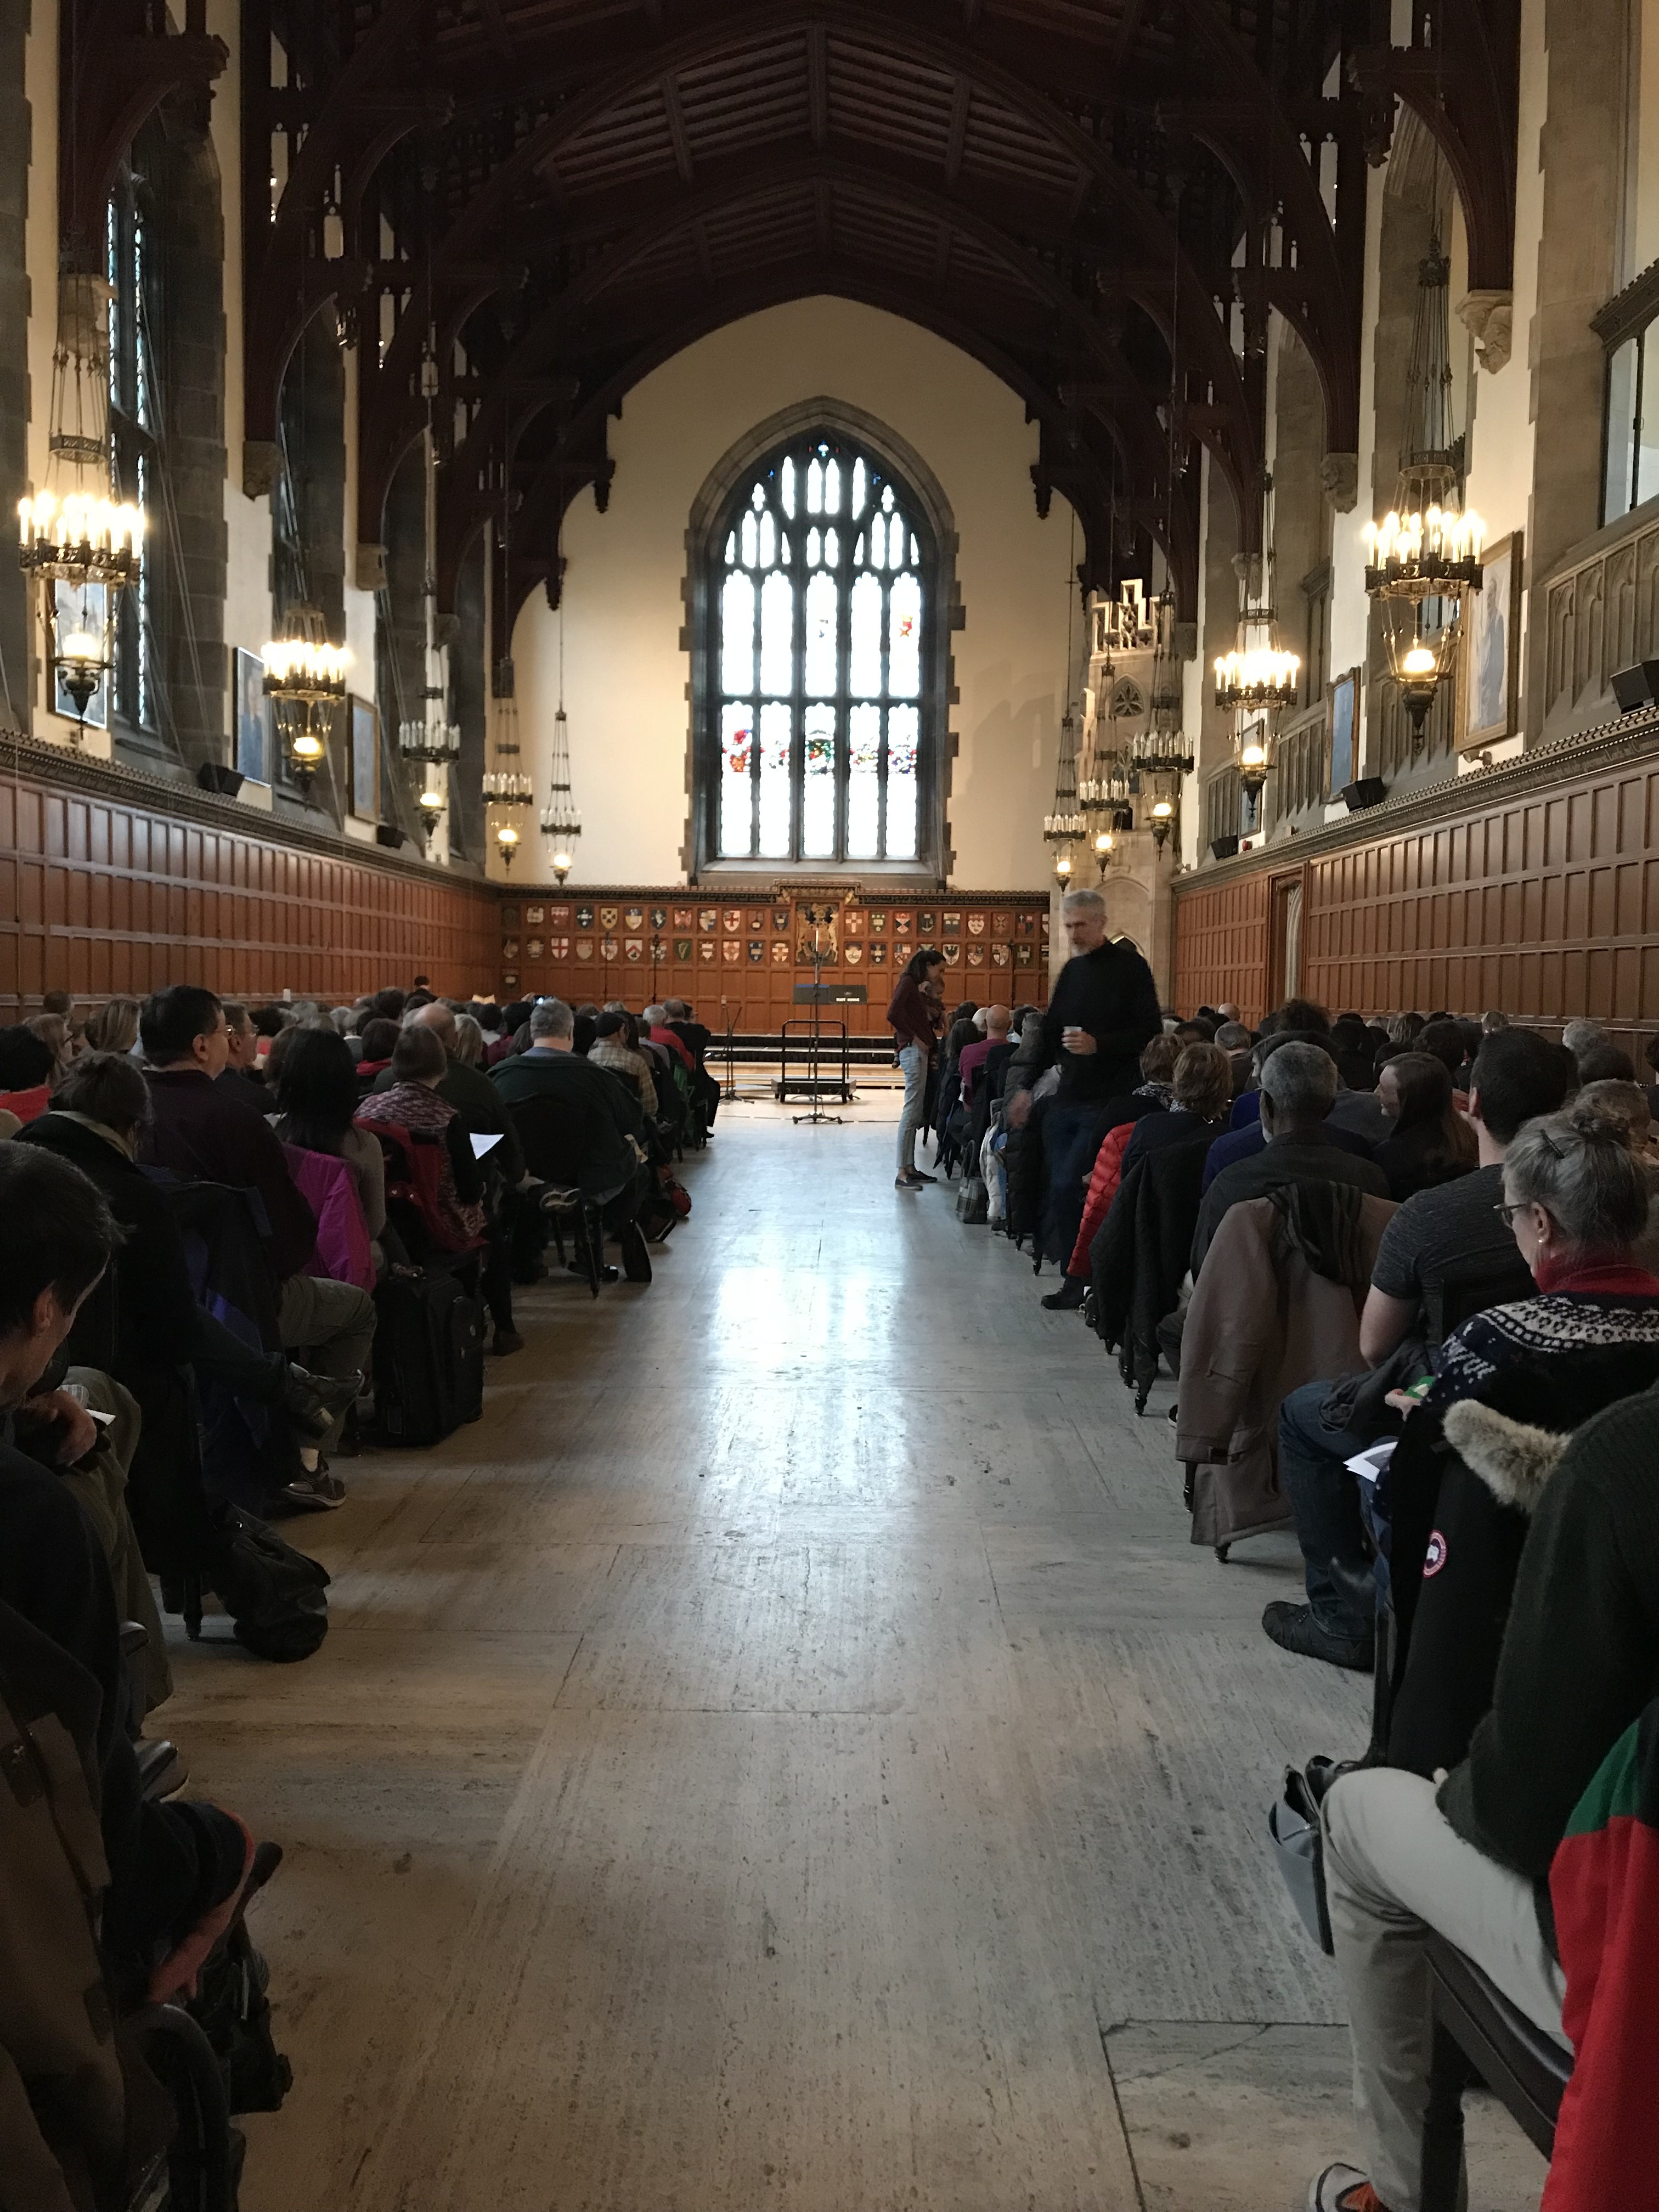 A picture of Great hall in Hart House where the concert was located